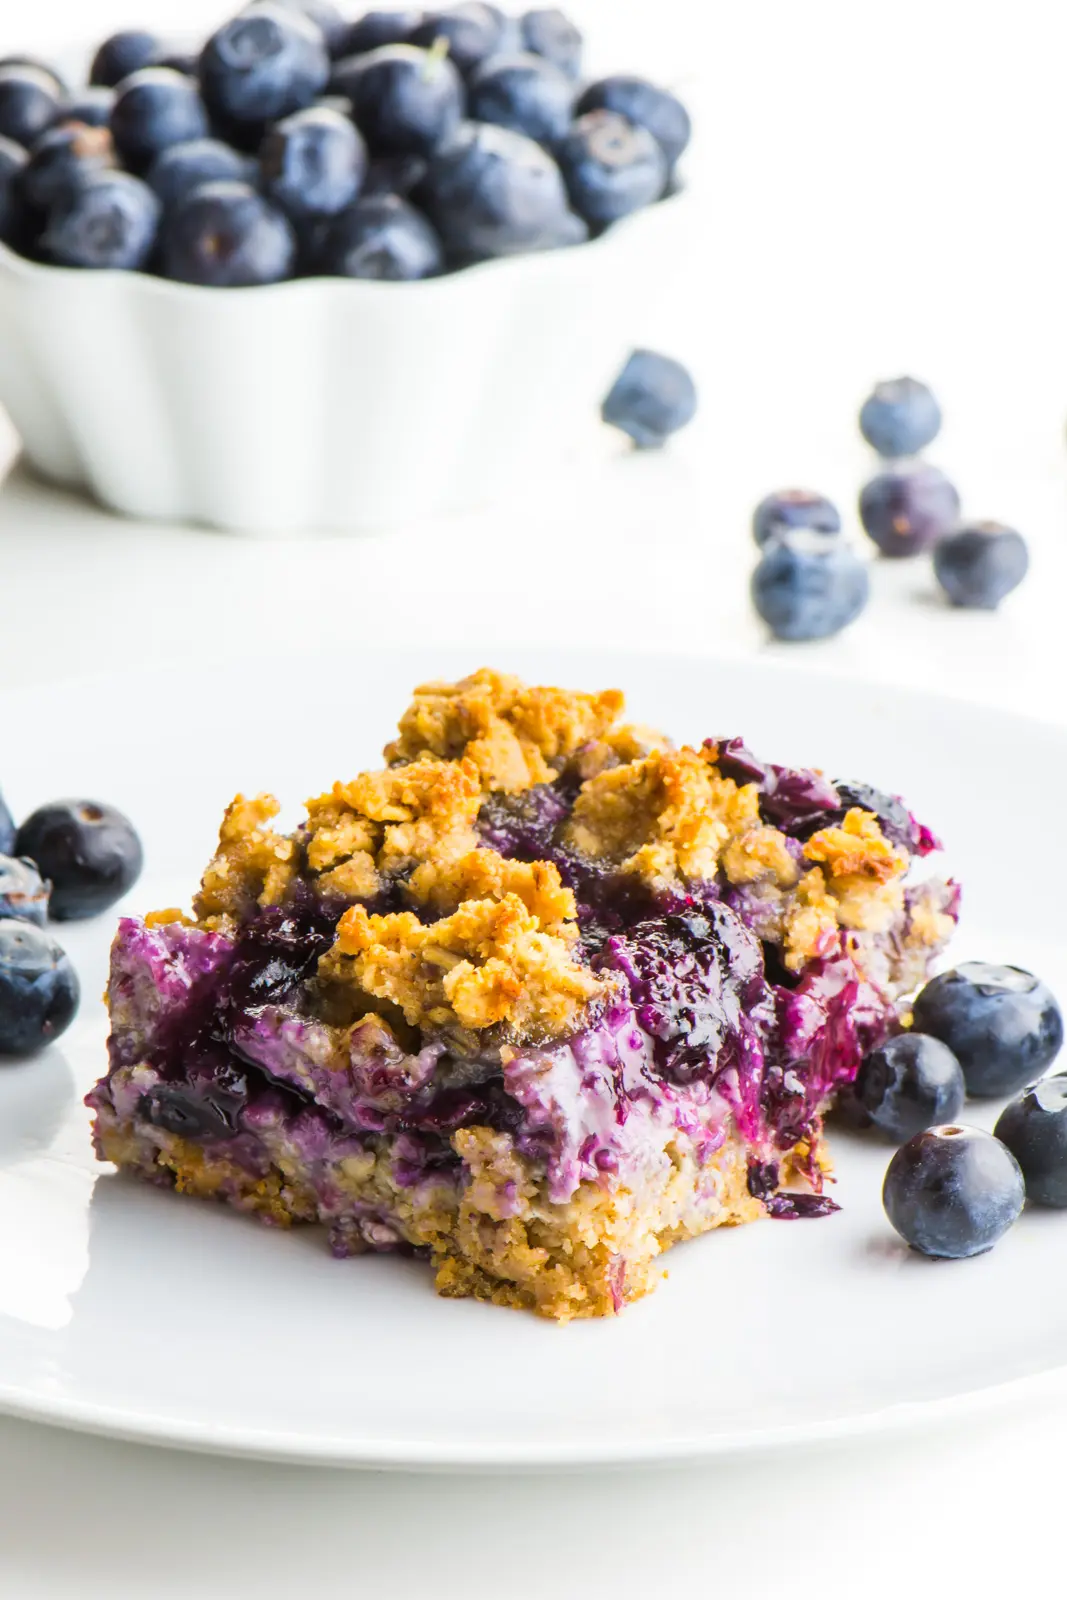 A blueberry crumble bar sits on a plate with lots of blueberries around it.